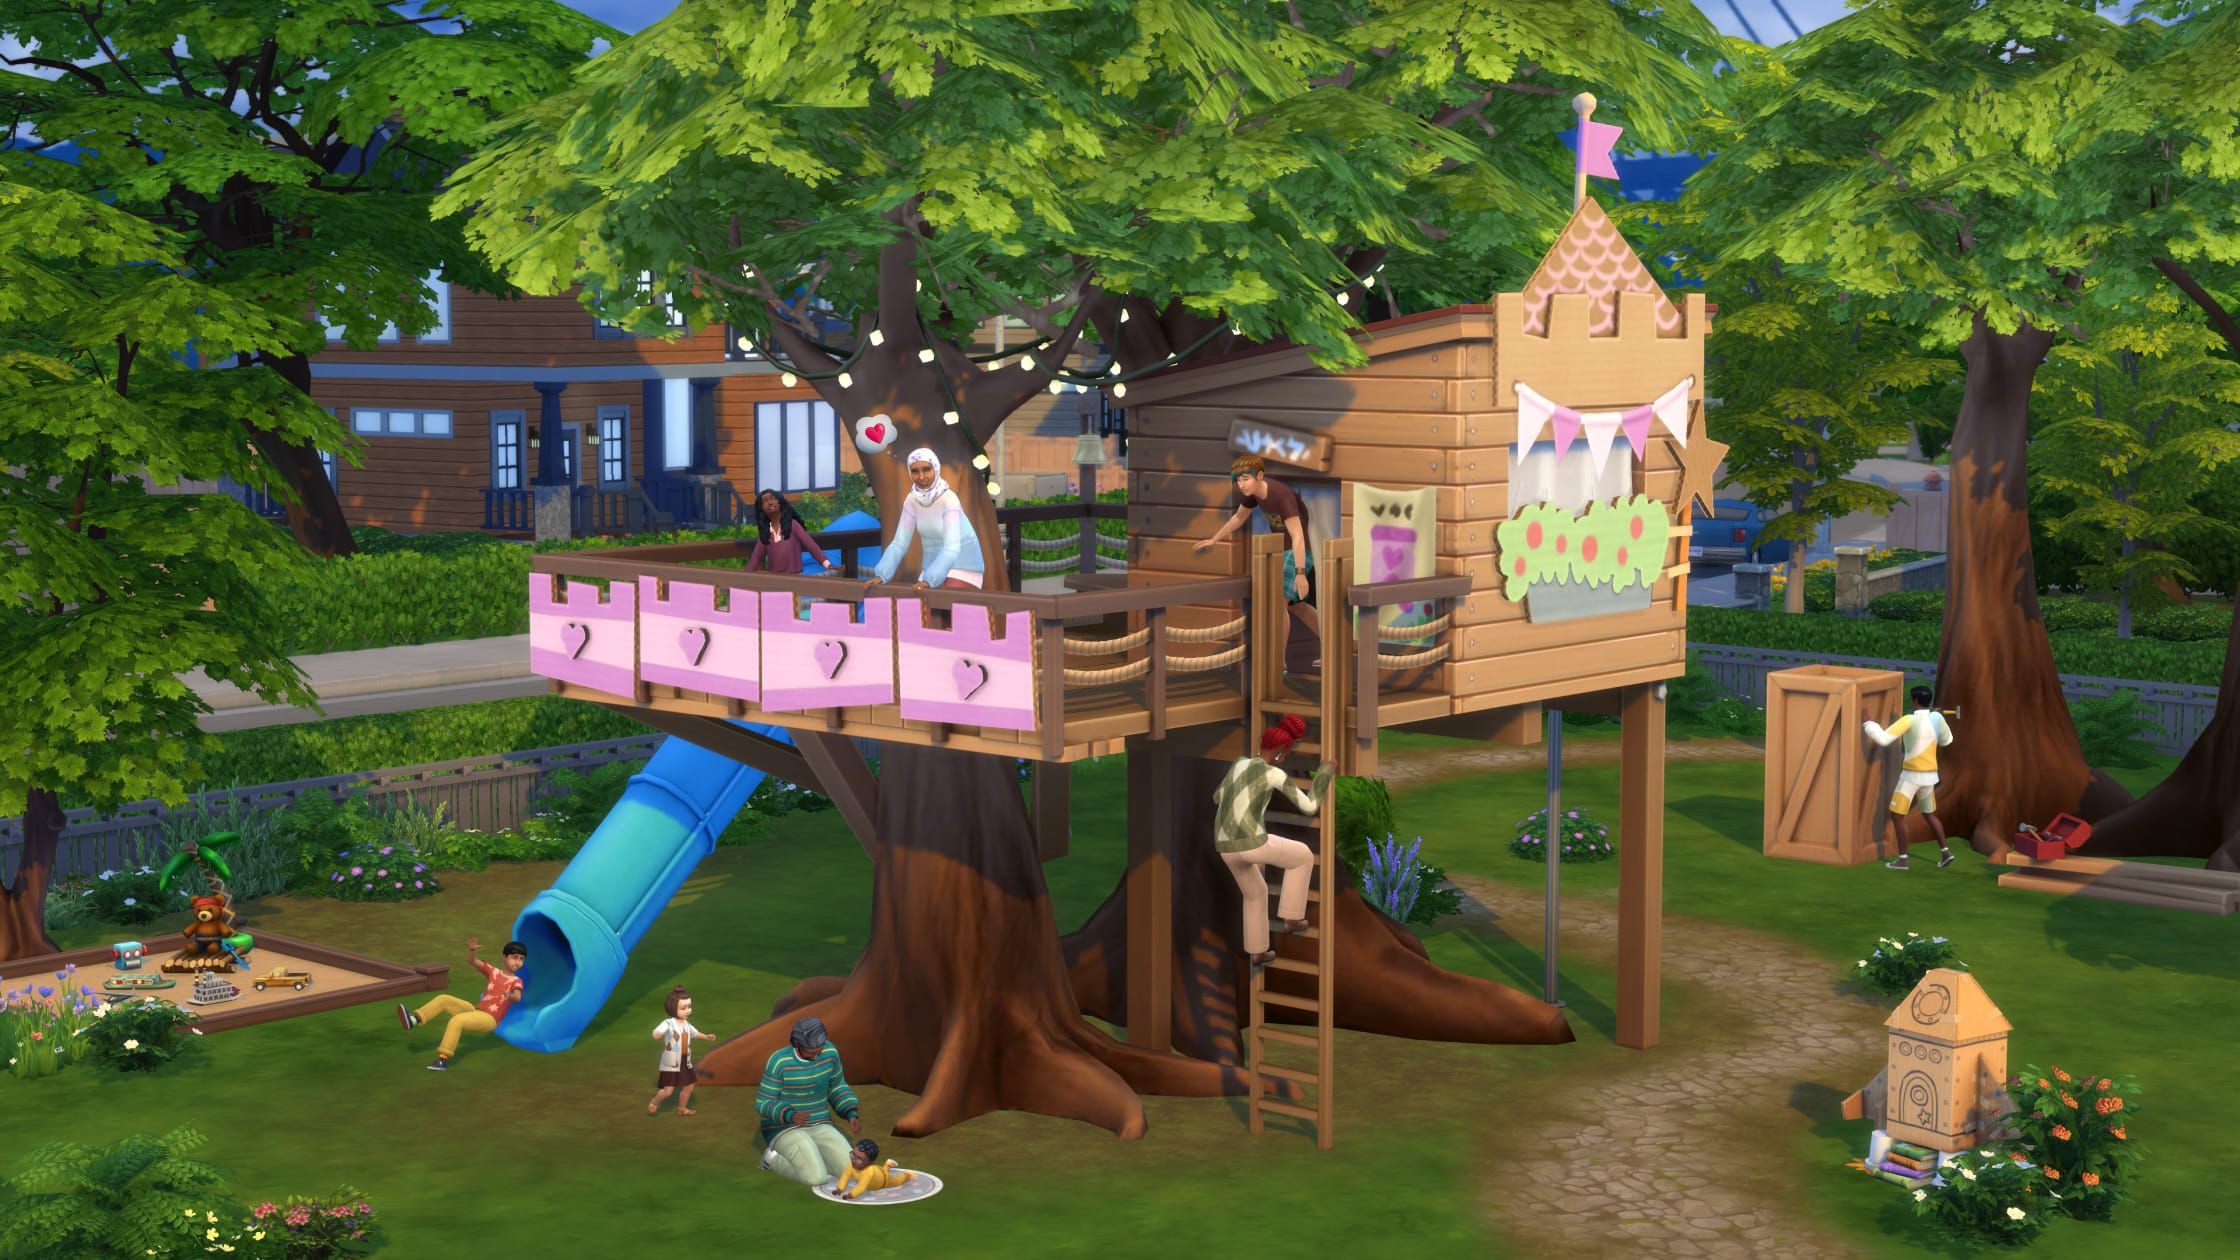 Sims 4 Treehouse covered in banners, one child stands on its ledge and another is climbing it.